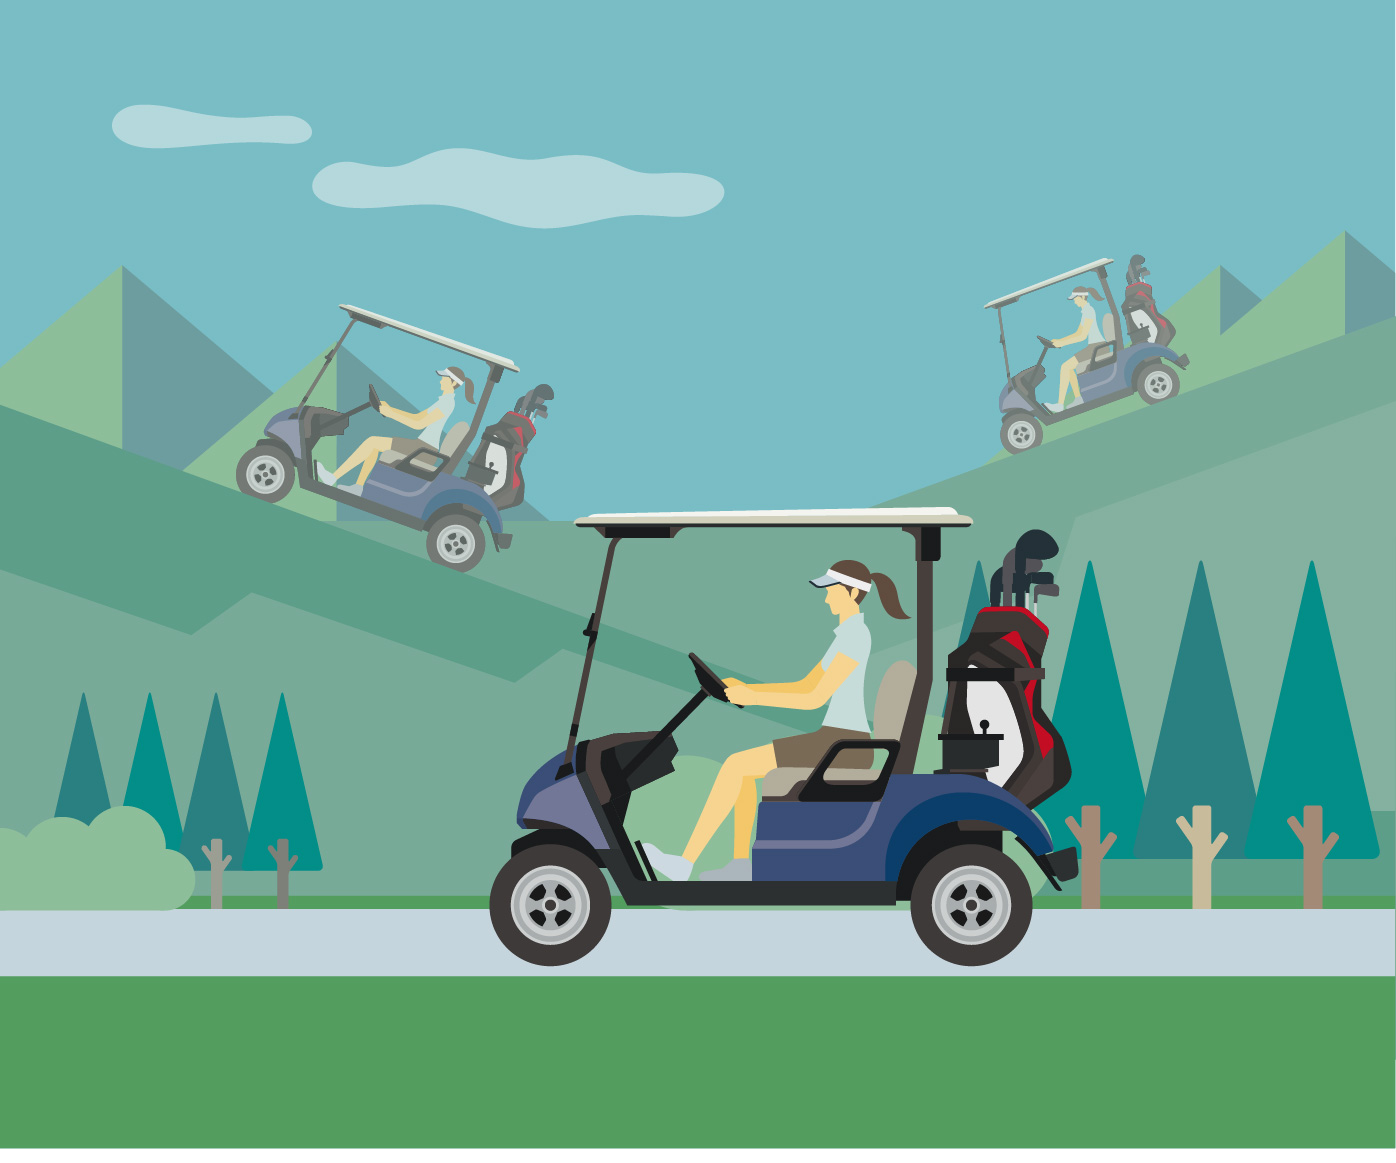 Operating multiple courses with many carts